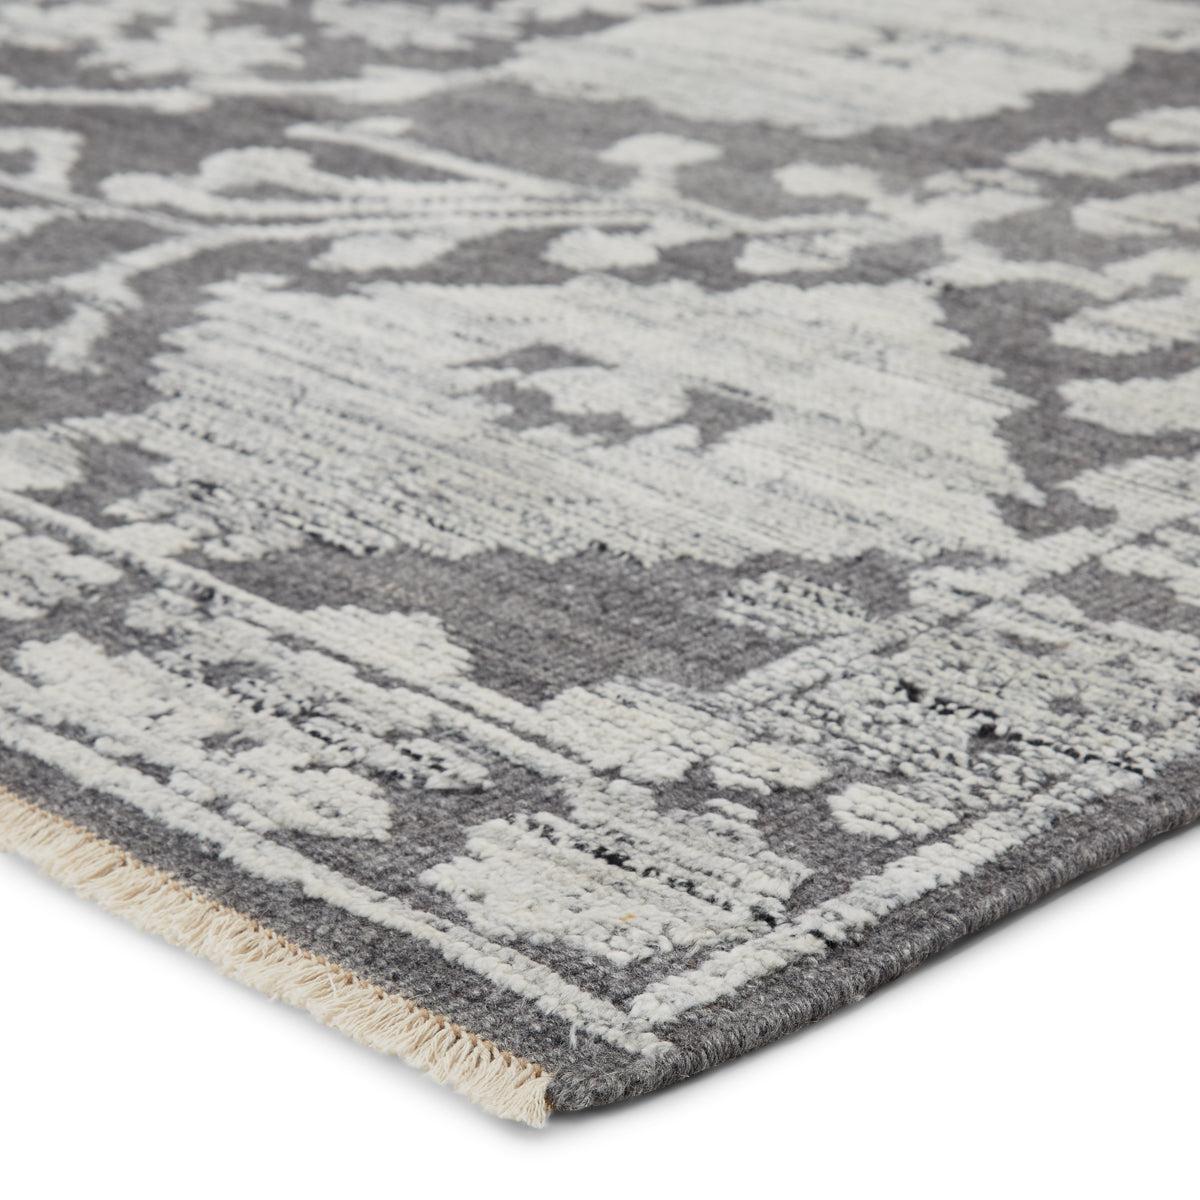 Rugs by Roo | Jaipur Living Riona Hand-Knotted Floral Gray White Area Rug-RUG146556